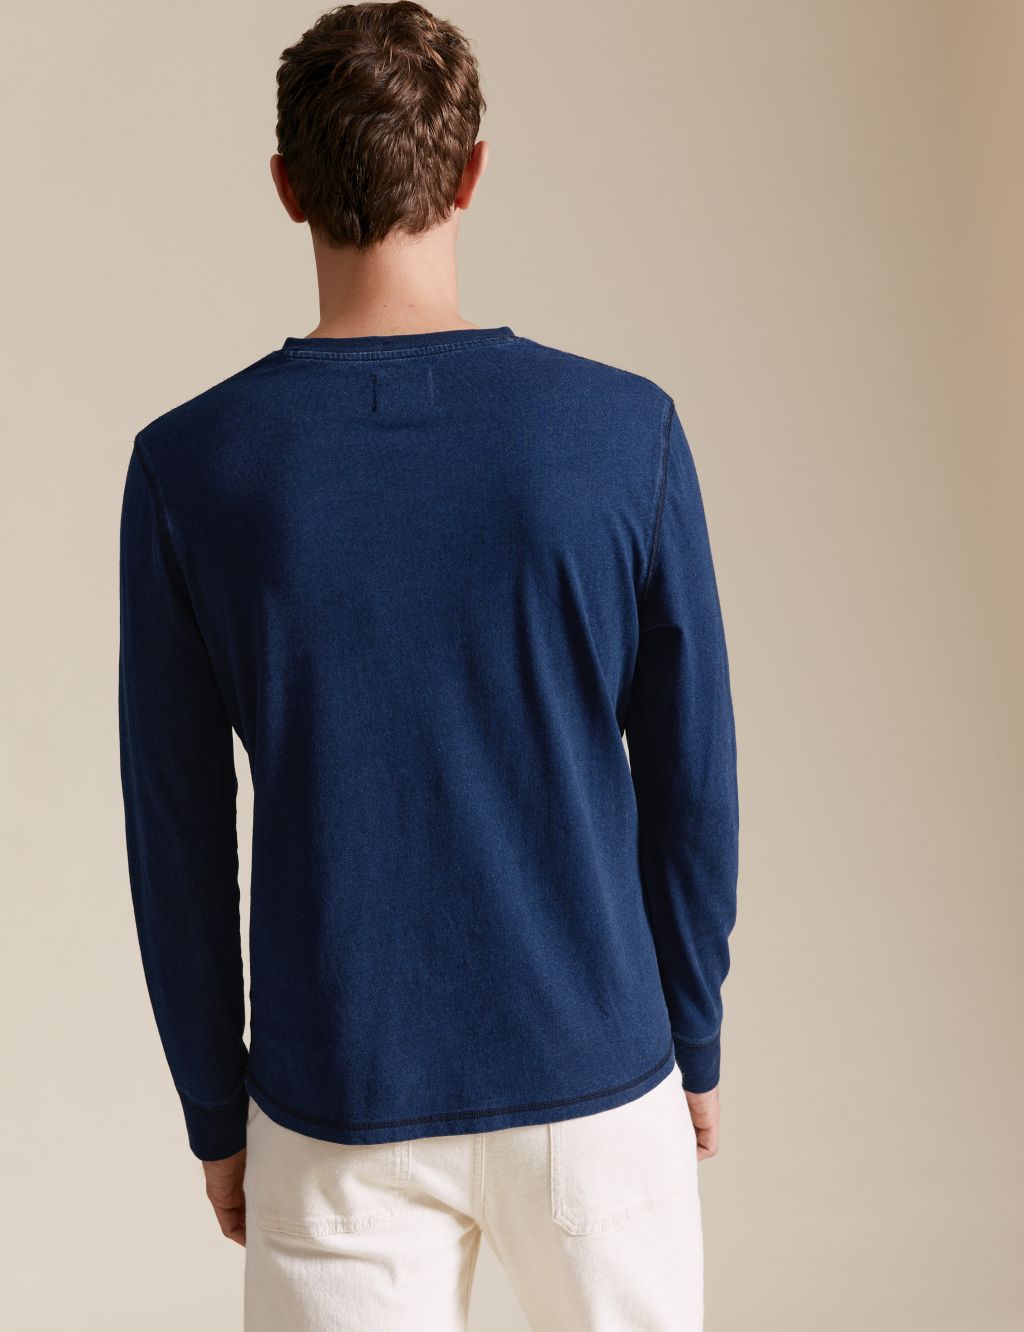 Wetherby Pure Cotton Henley T-Shirt image 5